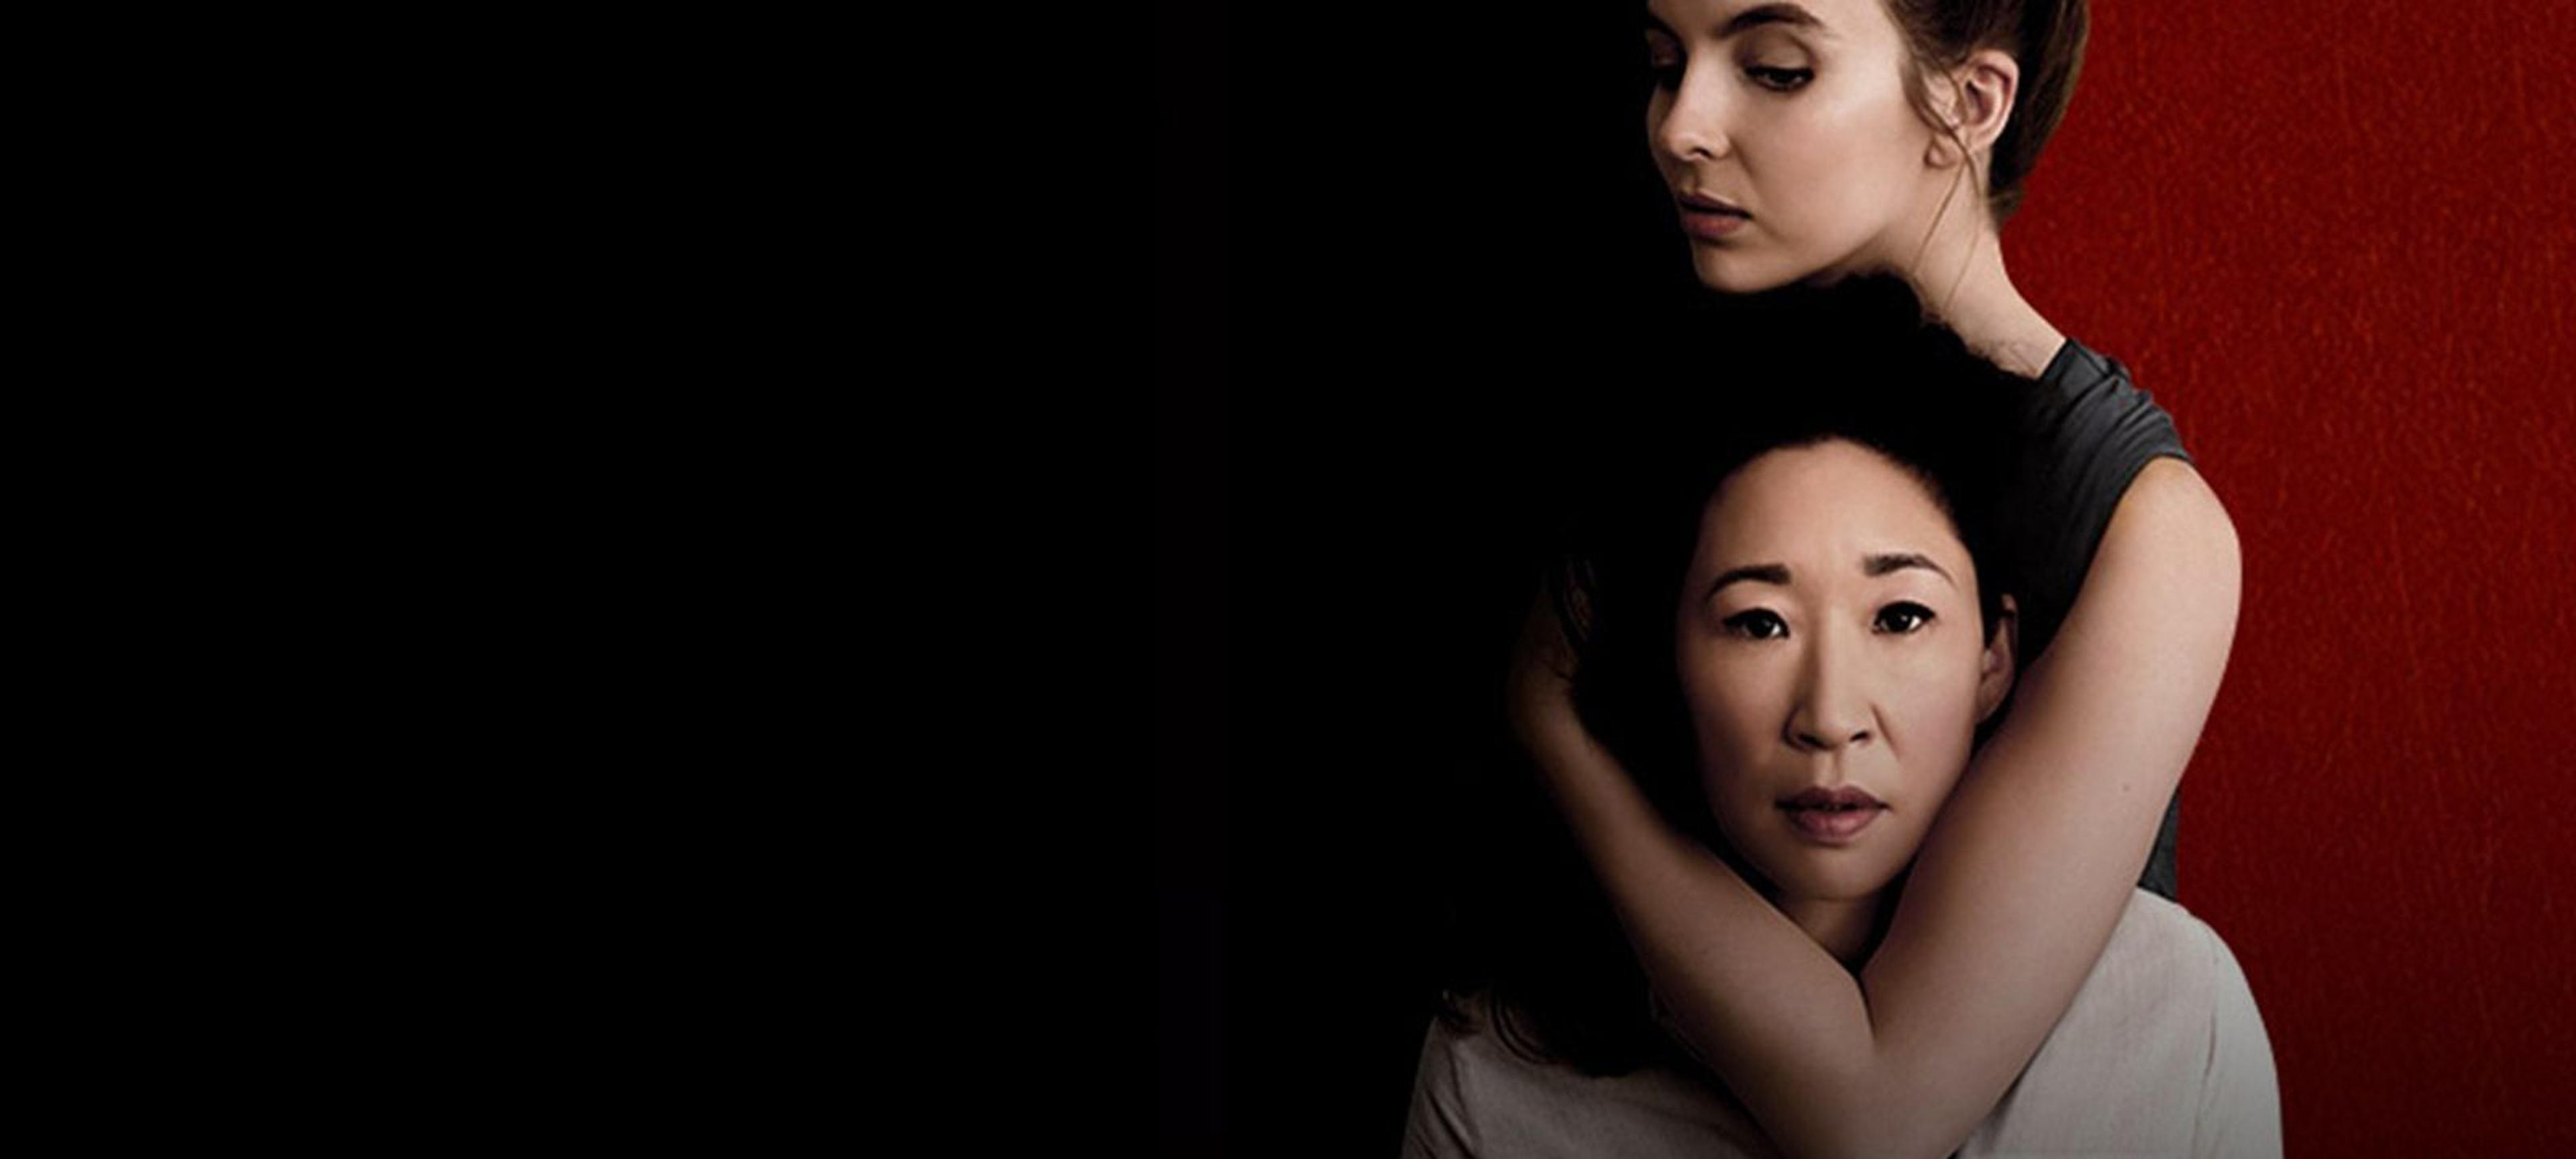 Too Close, Too Compromised: “Killing Eve” and the Promise of Sandra Oh